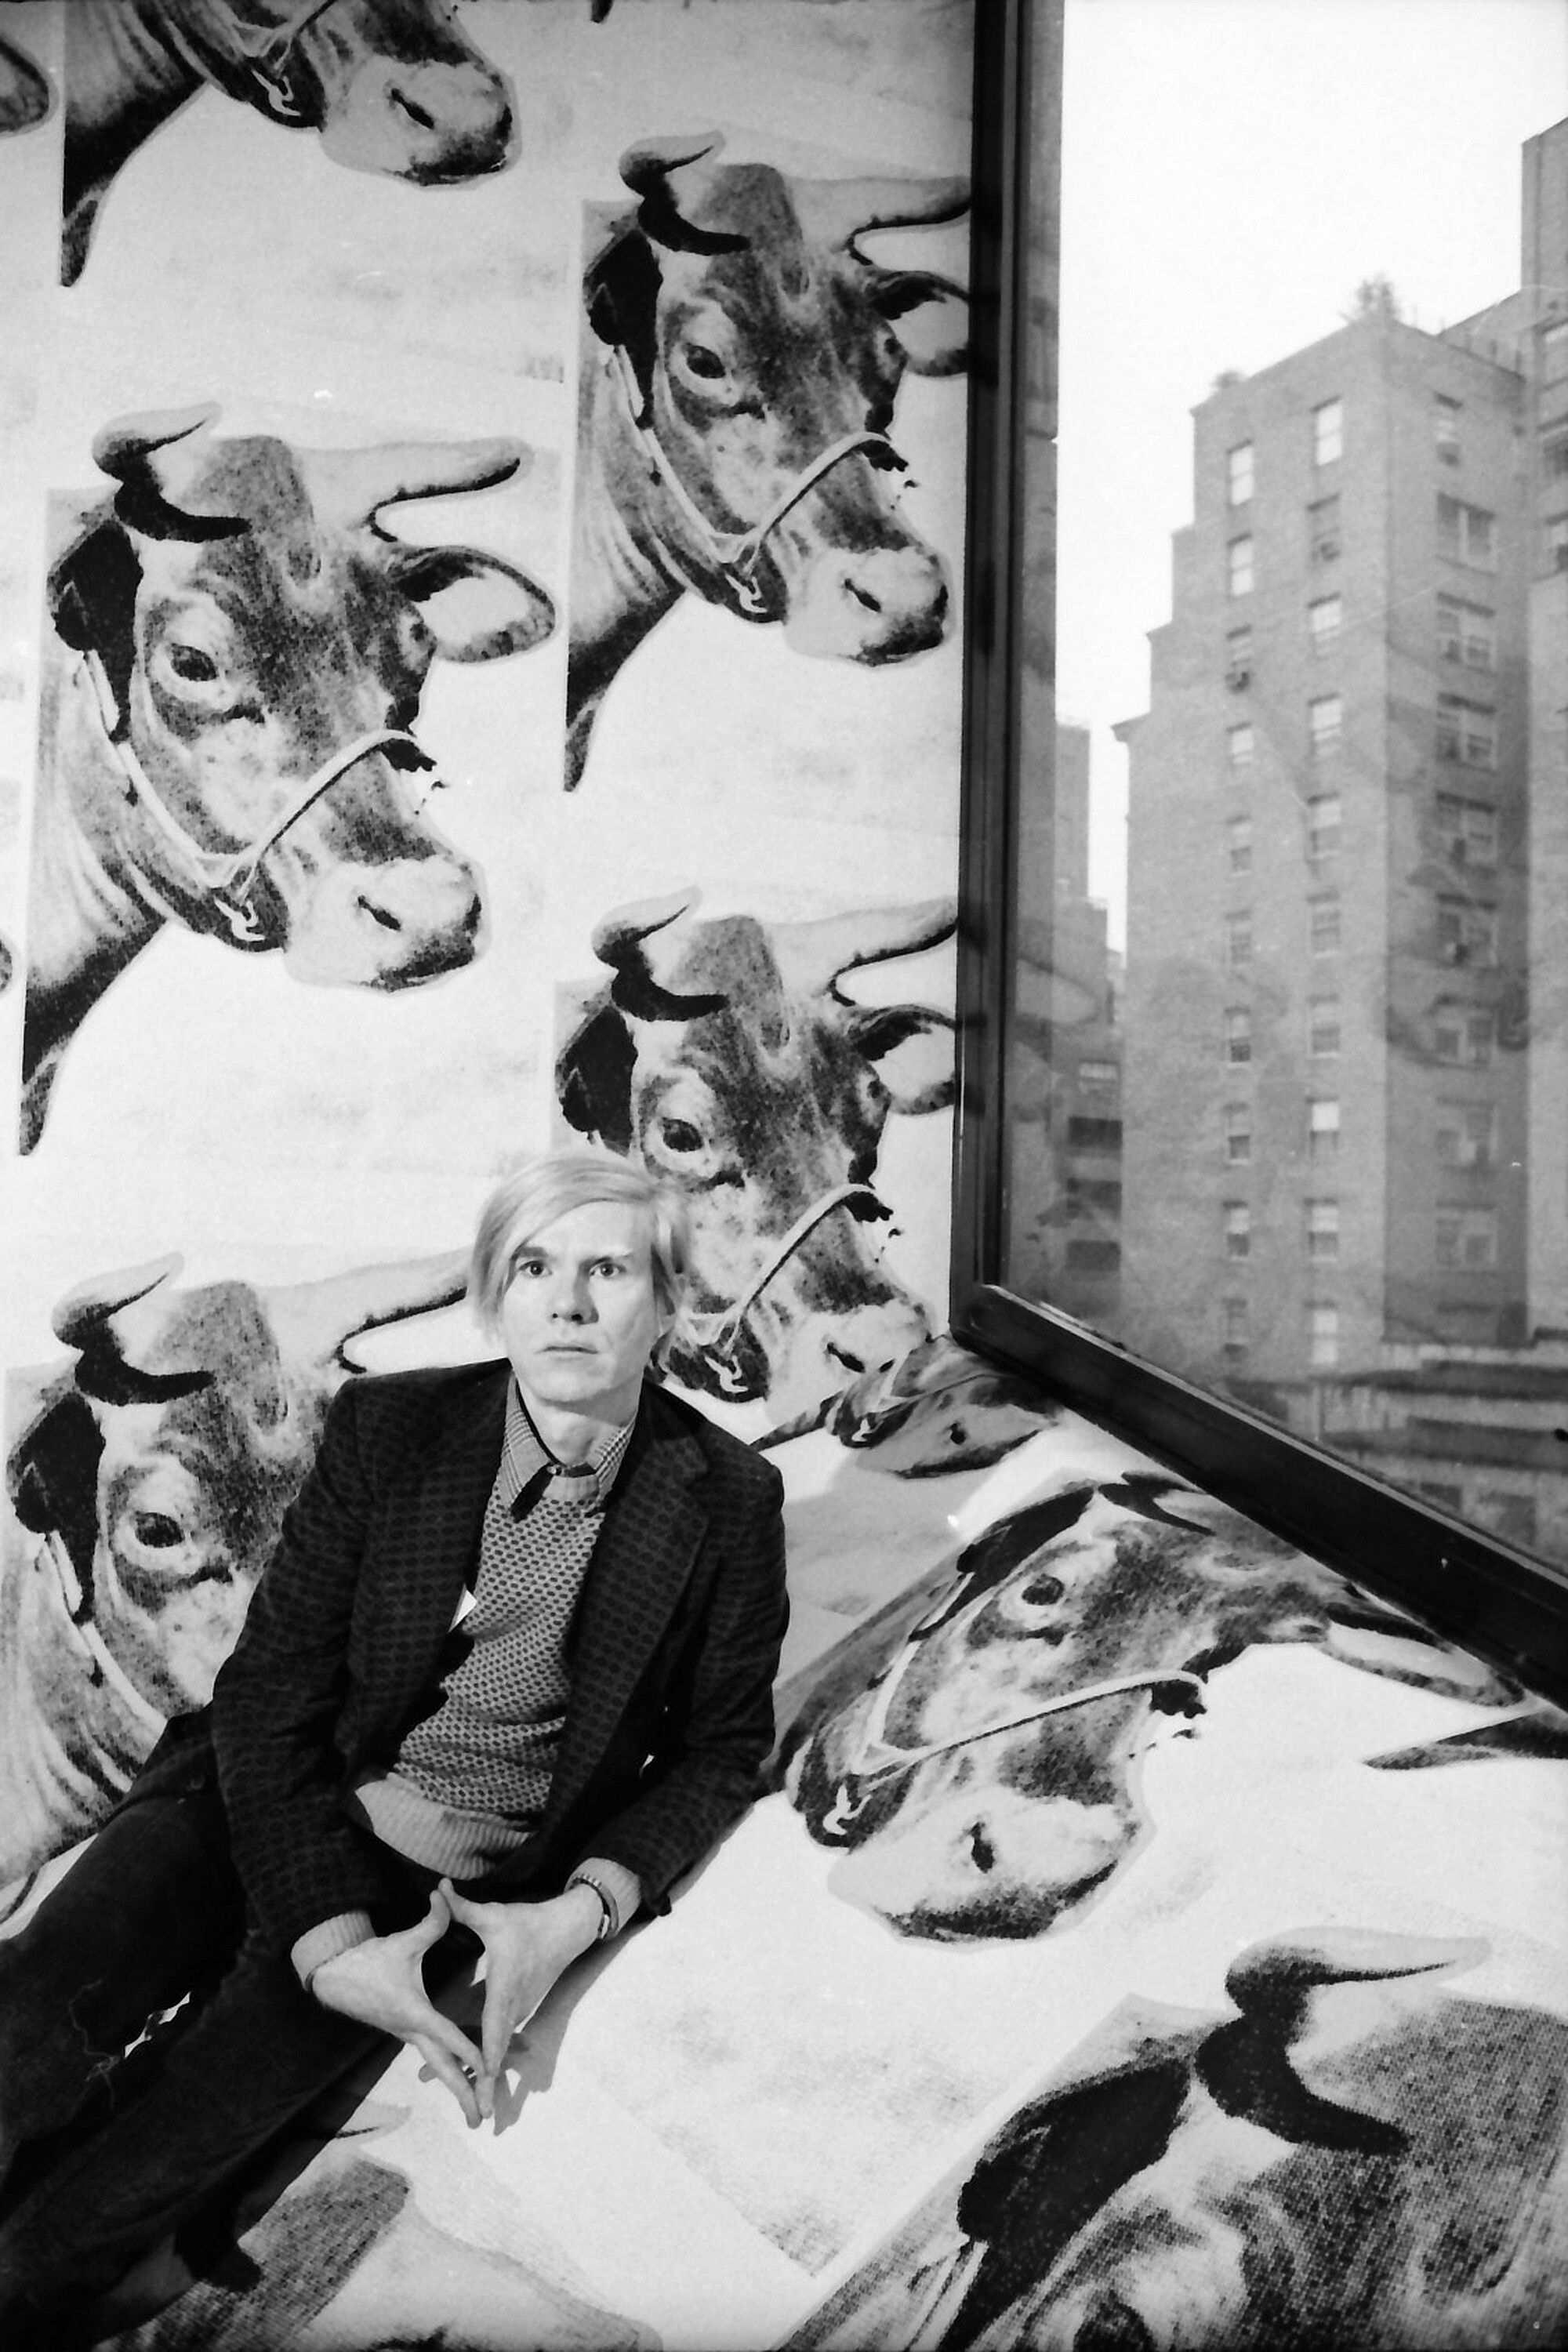 A portrait of Andy Warhol sitting in front of a window